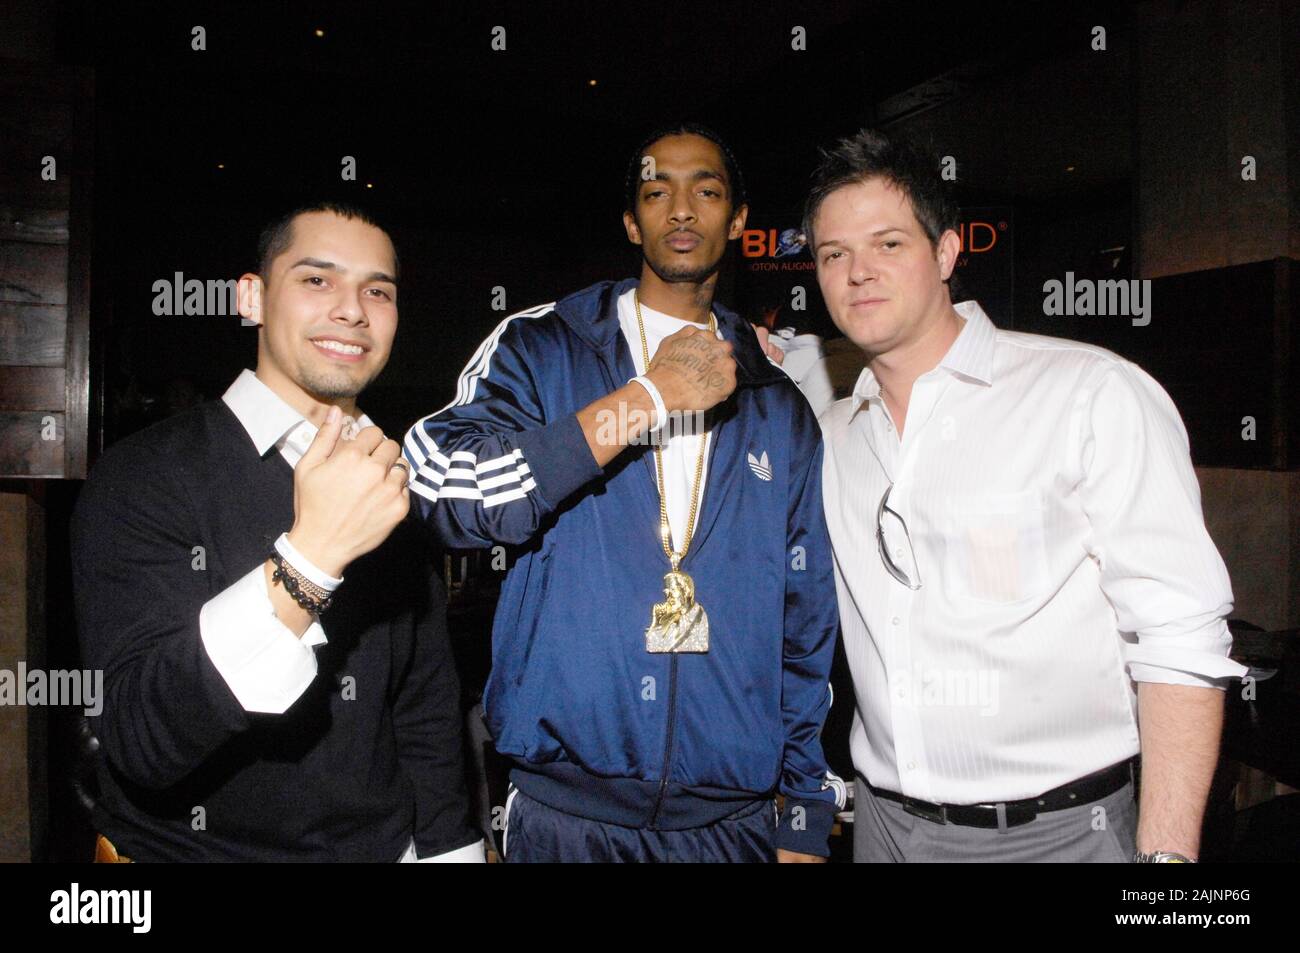 Rapper Nipsey Hussle  (c) attends a Grammy gifting suite at The Roosevelt Hotel on January 29, 2010 in Hollywood, California. Stock Photo